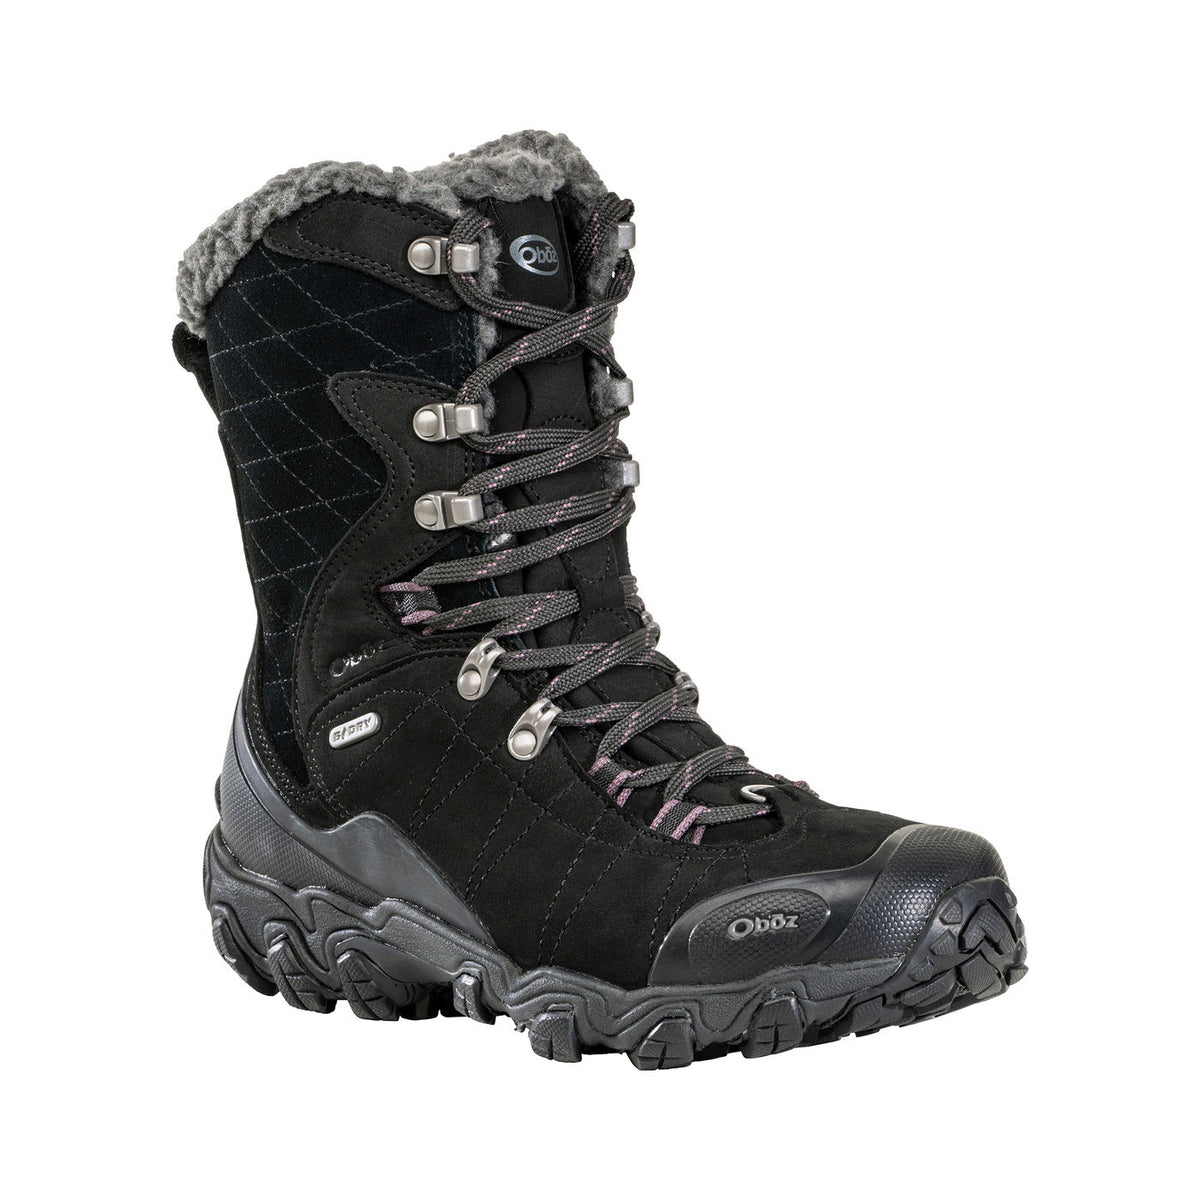 A Oboz Bridger 9&quot; Insulated B-Dry Black Sea women&#39;s winter hiking boot with fur lining and rugged sole, featuring lace hooks and a quilted design.